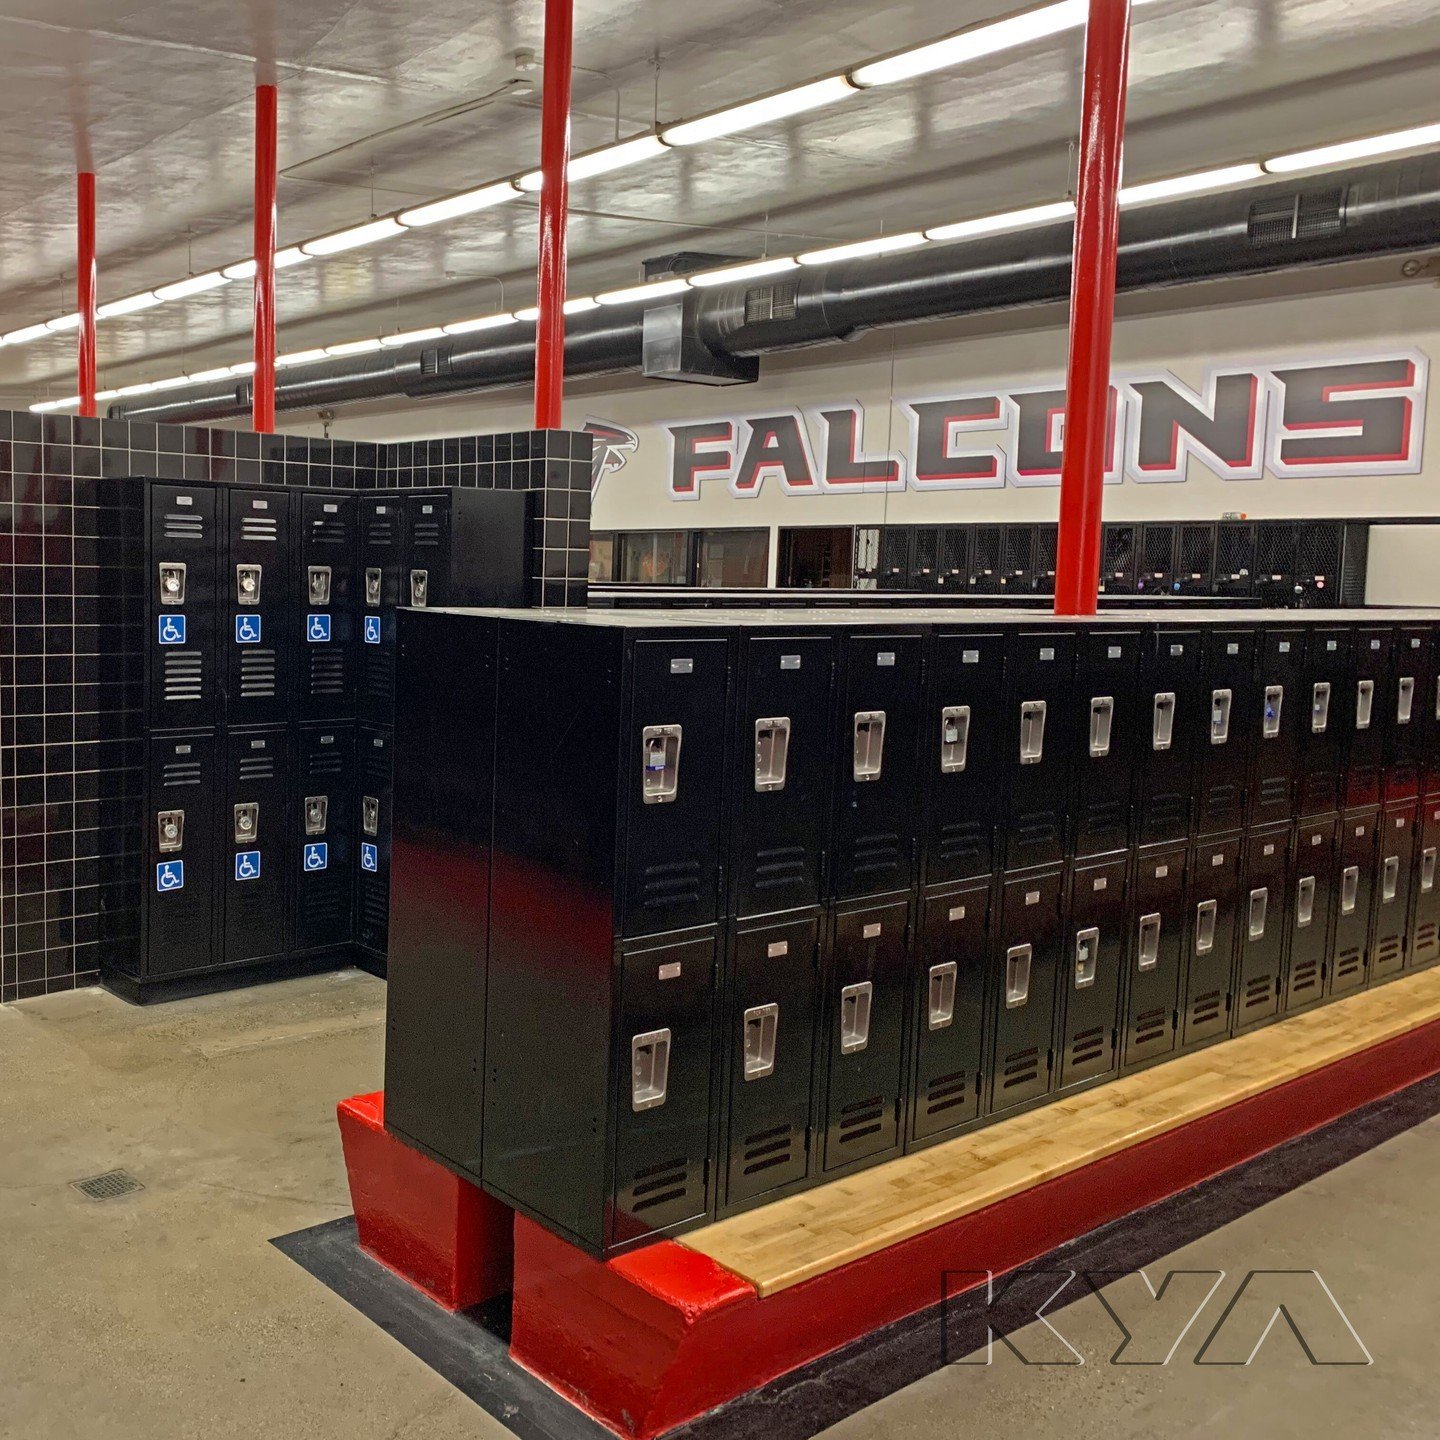 Lockers: the unsung heroes of school or gym life! Durable lockers are an essential part of school life. Students need the ability to safely store books, bags, and any other items to be able to participate fully in all the activities the school has to